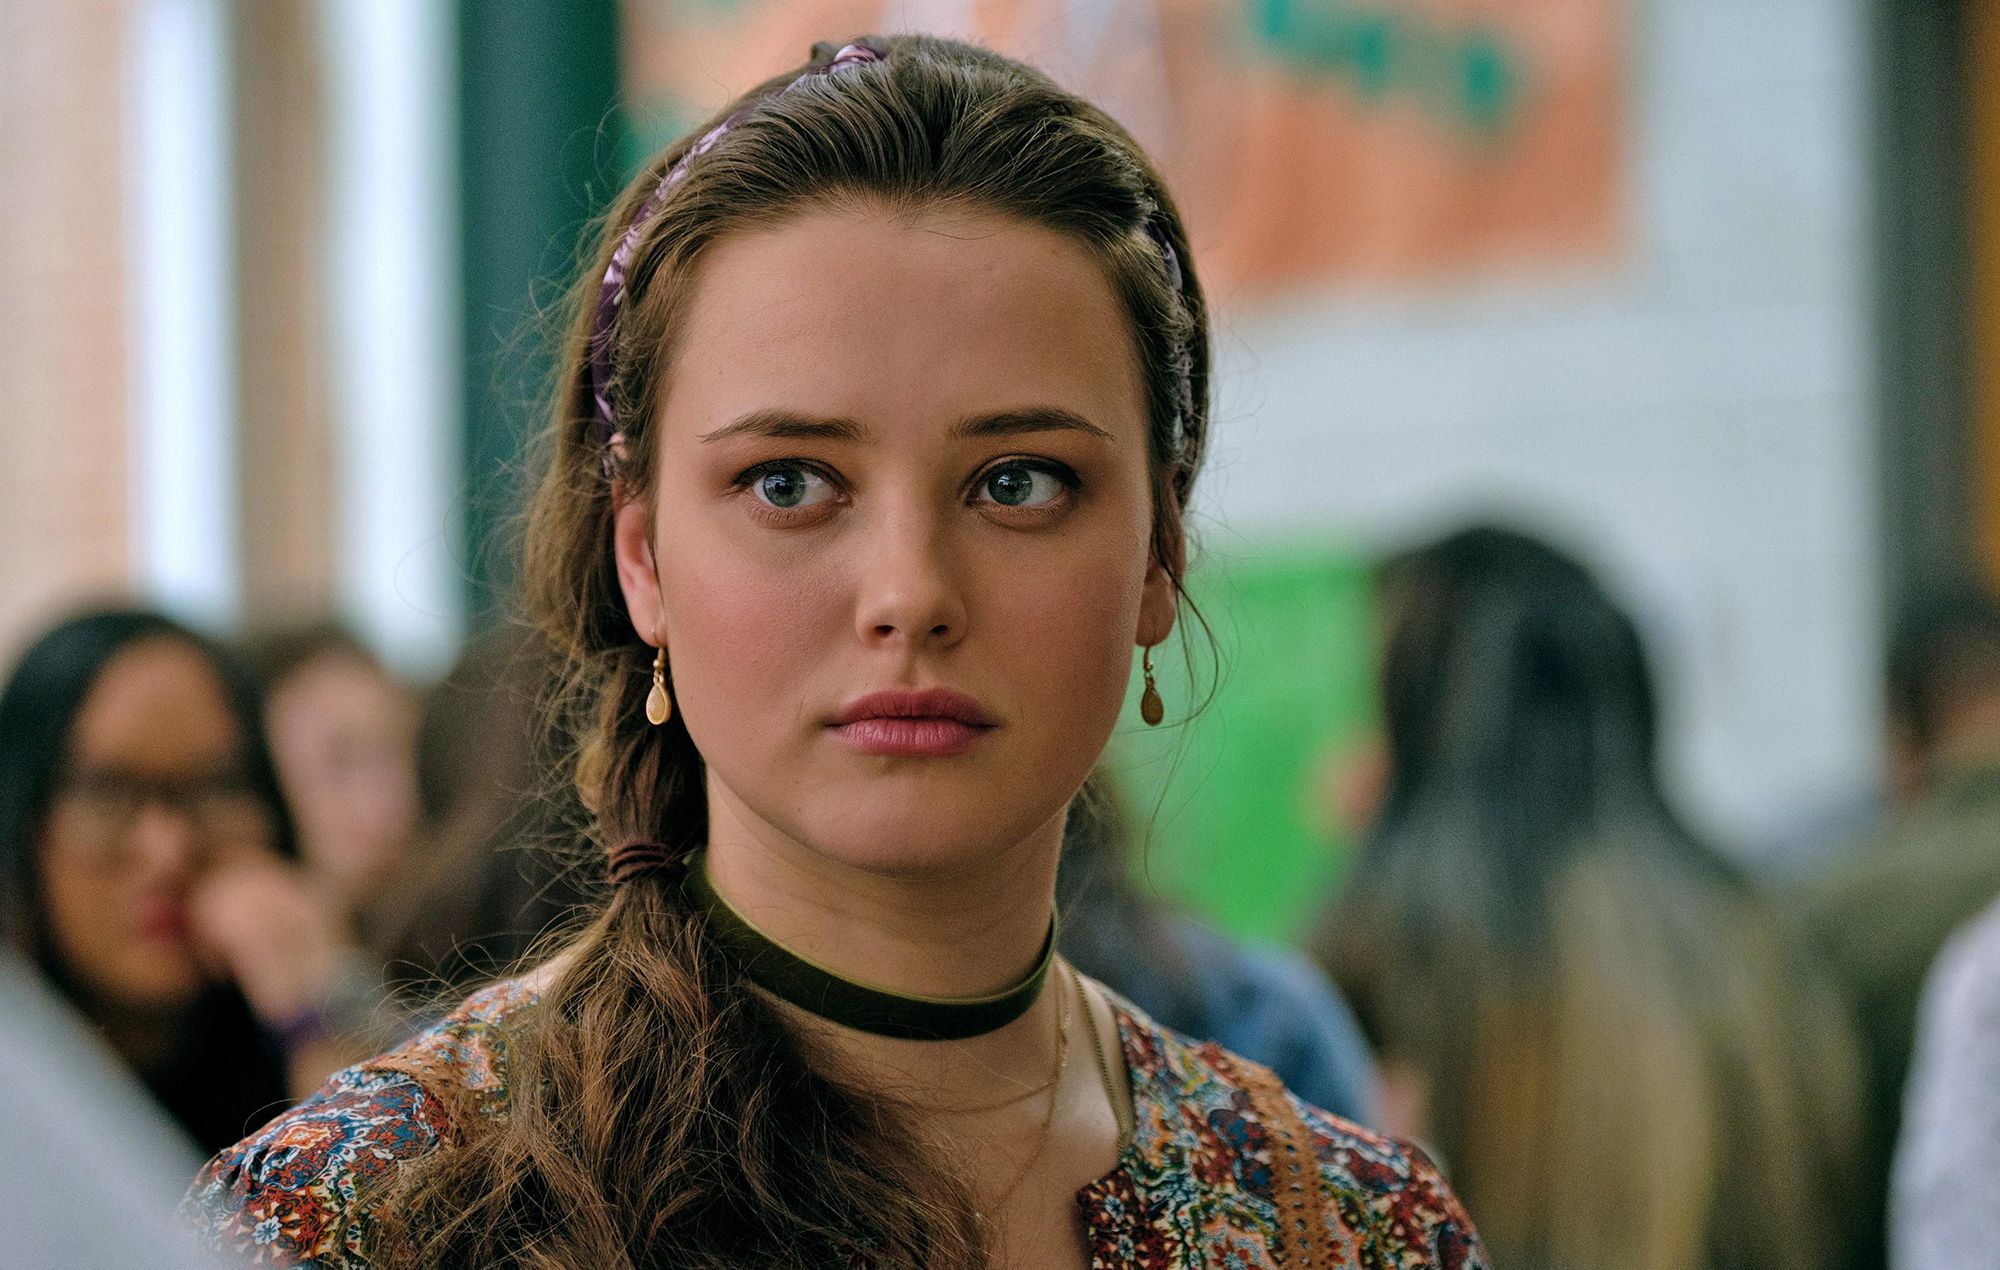 Katherine Langford: Fantasy fans haven't had a lot of female role